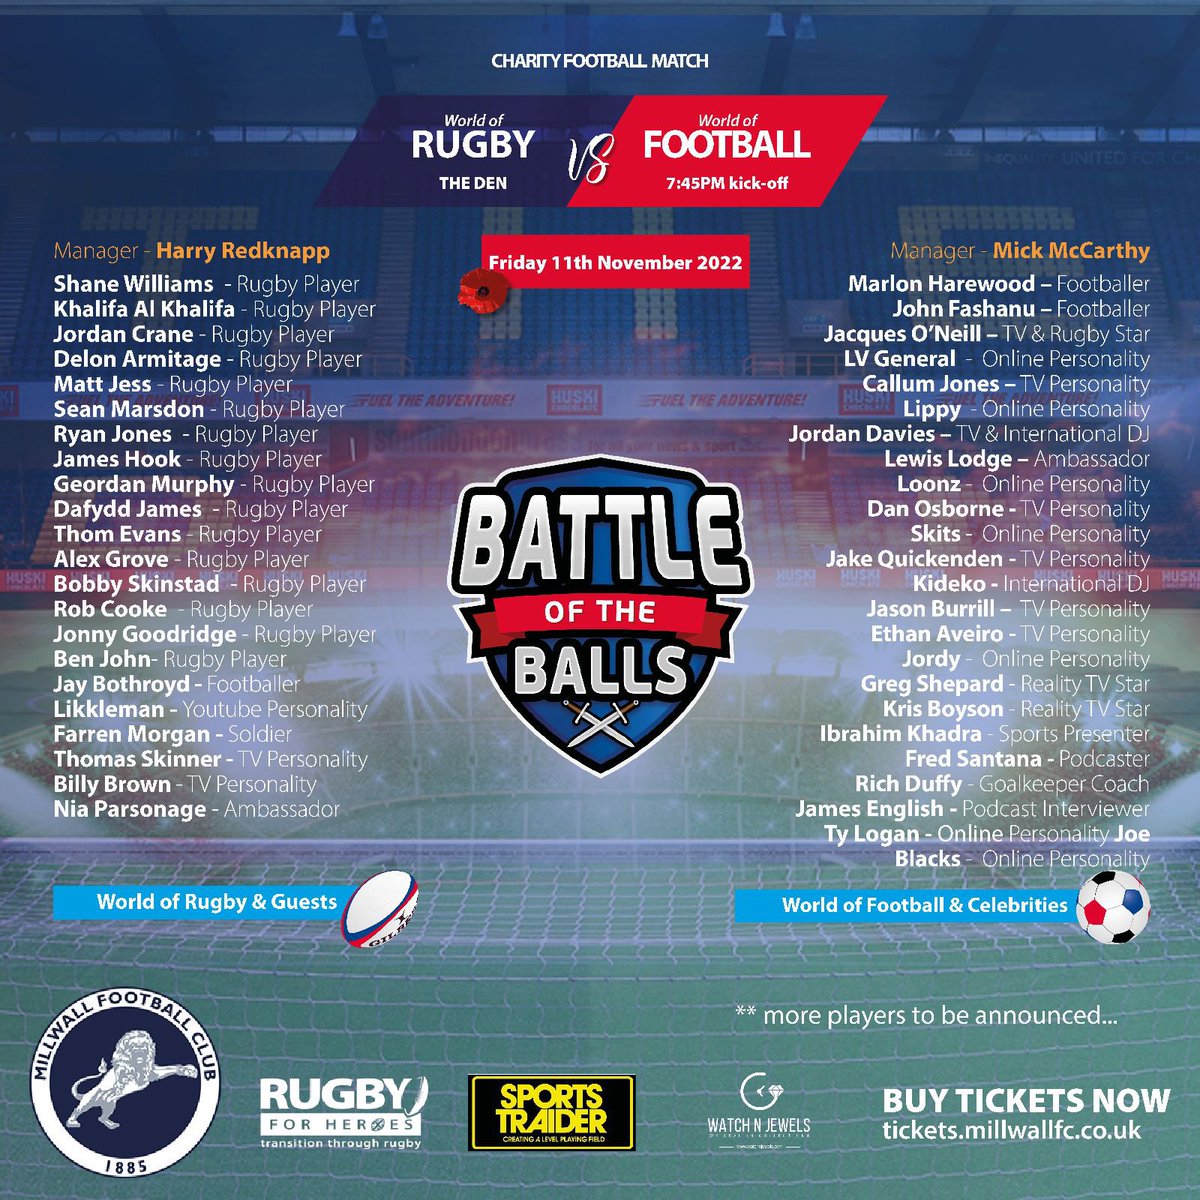 Hope everyone can support this. Should be a lot of fun! @battleotballs on 11th November at @millwallfc supporting our military @Rugbyforheroes please come along if you can.